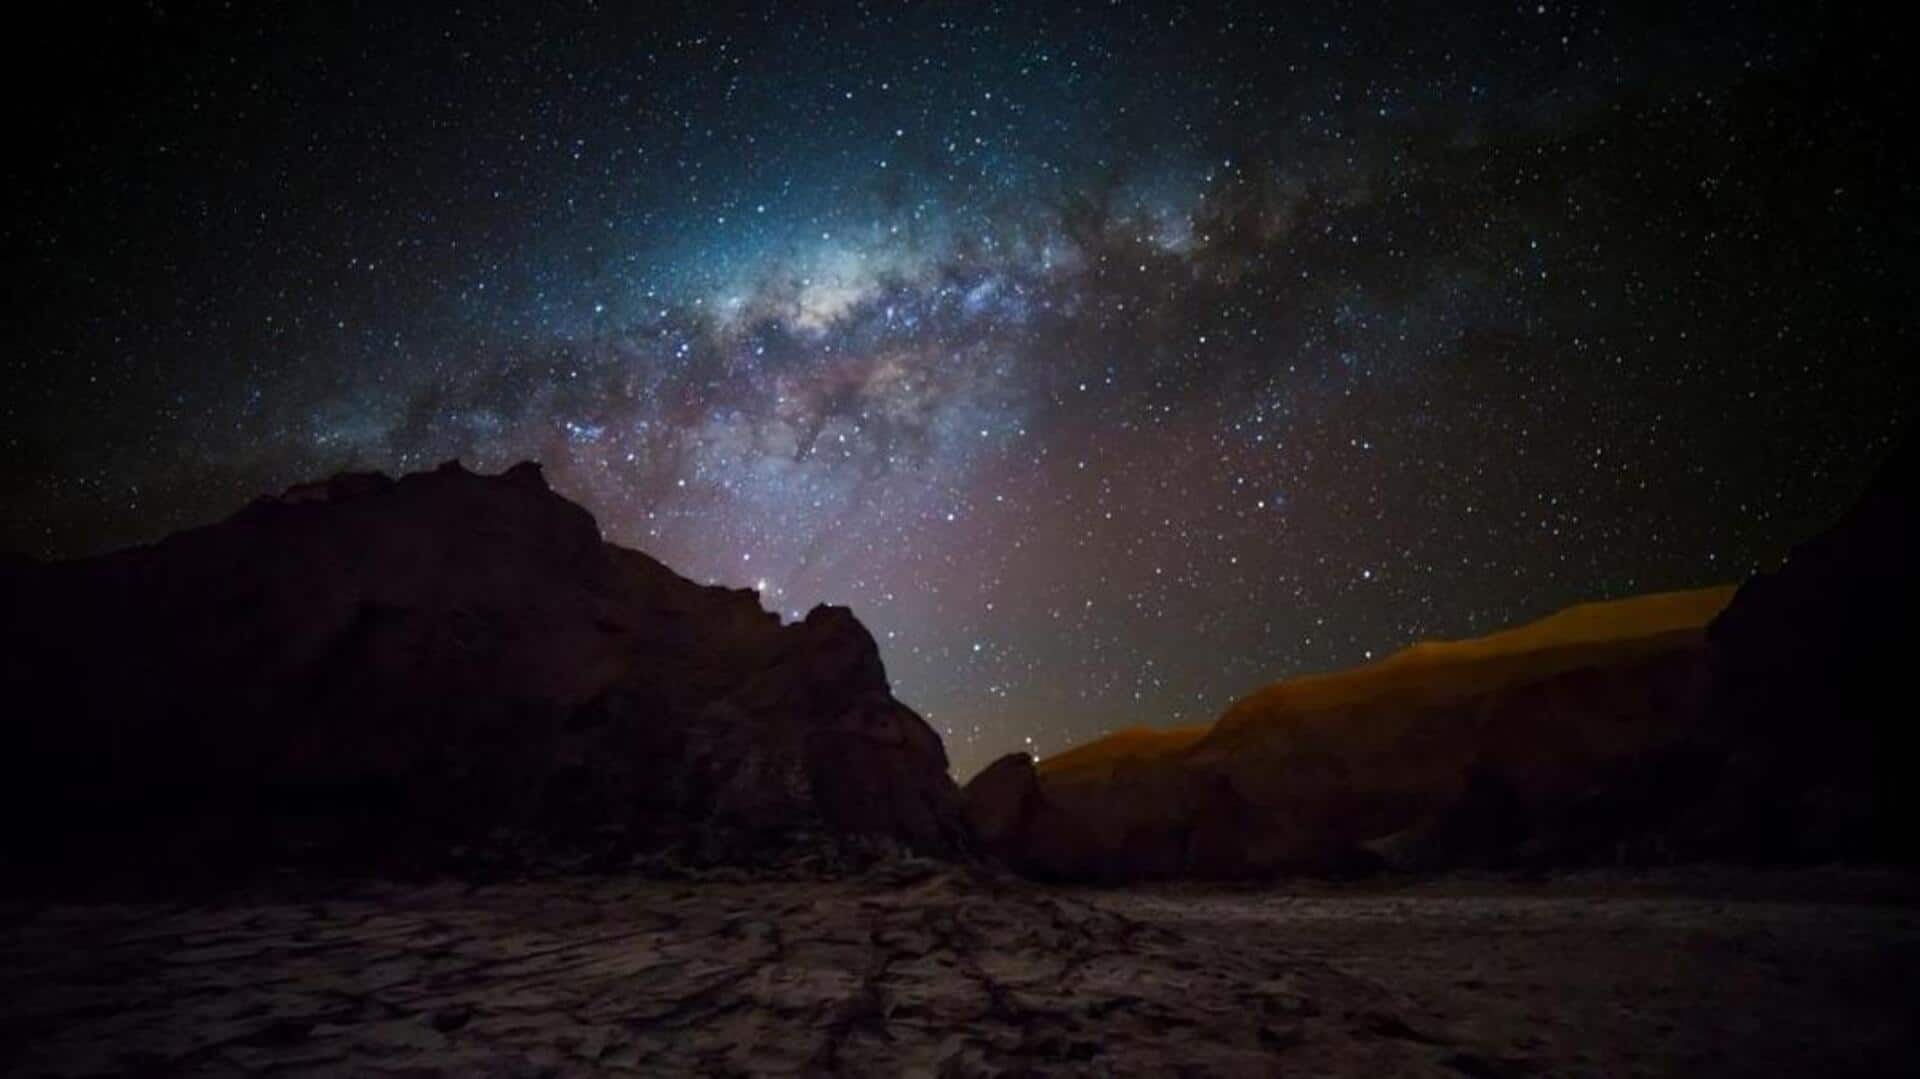 Starry nights in Atacama Desert, Chile: An astrophotography dream